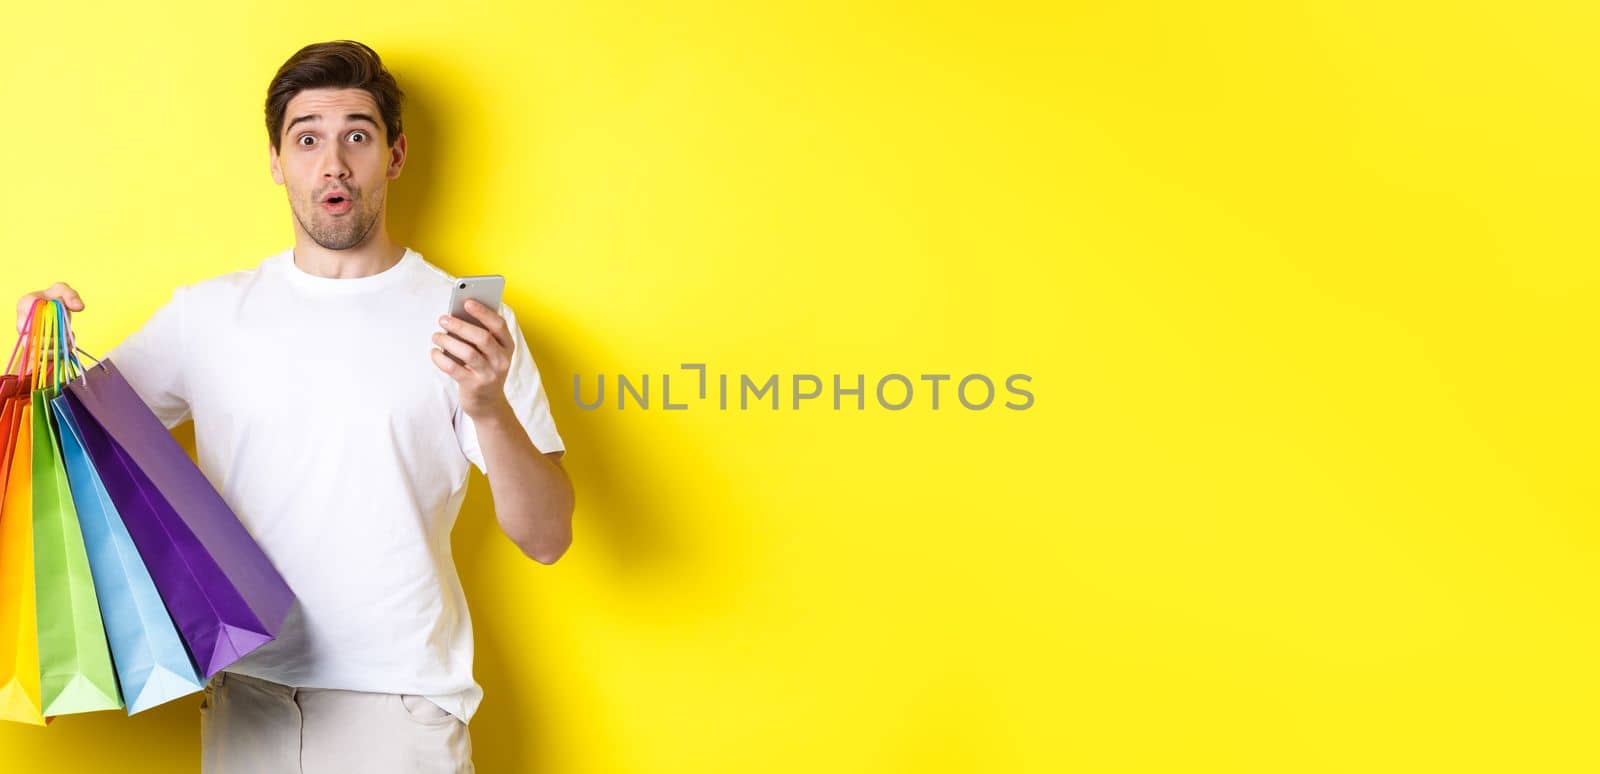 Concept of mobile banking and cashback. Surprised man holding shopping bags and smartphone, standing over yellow background.